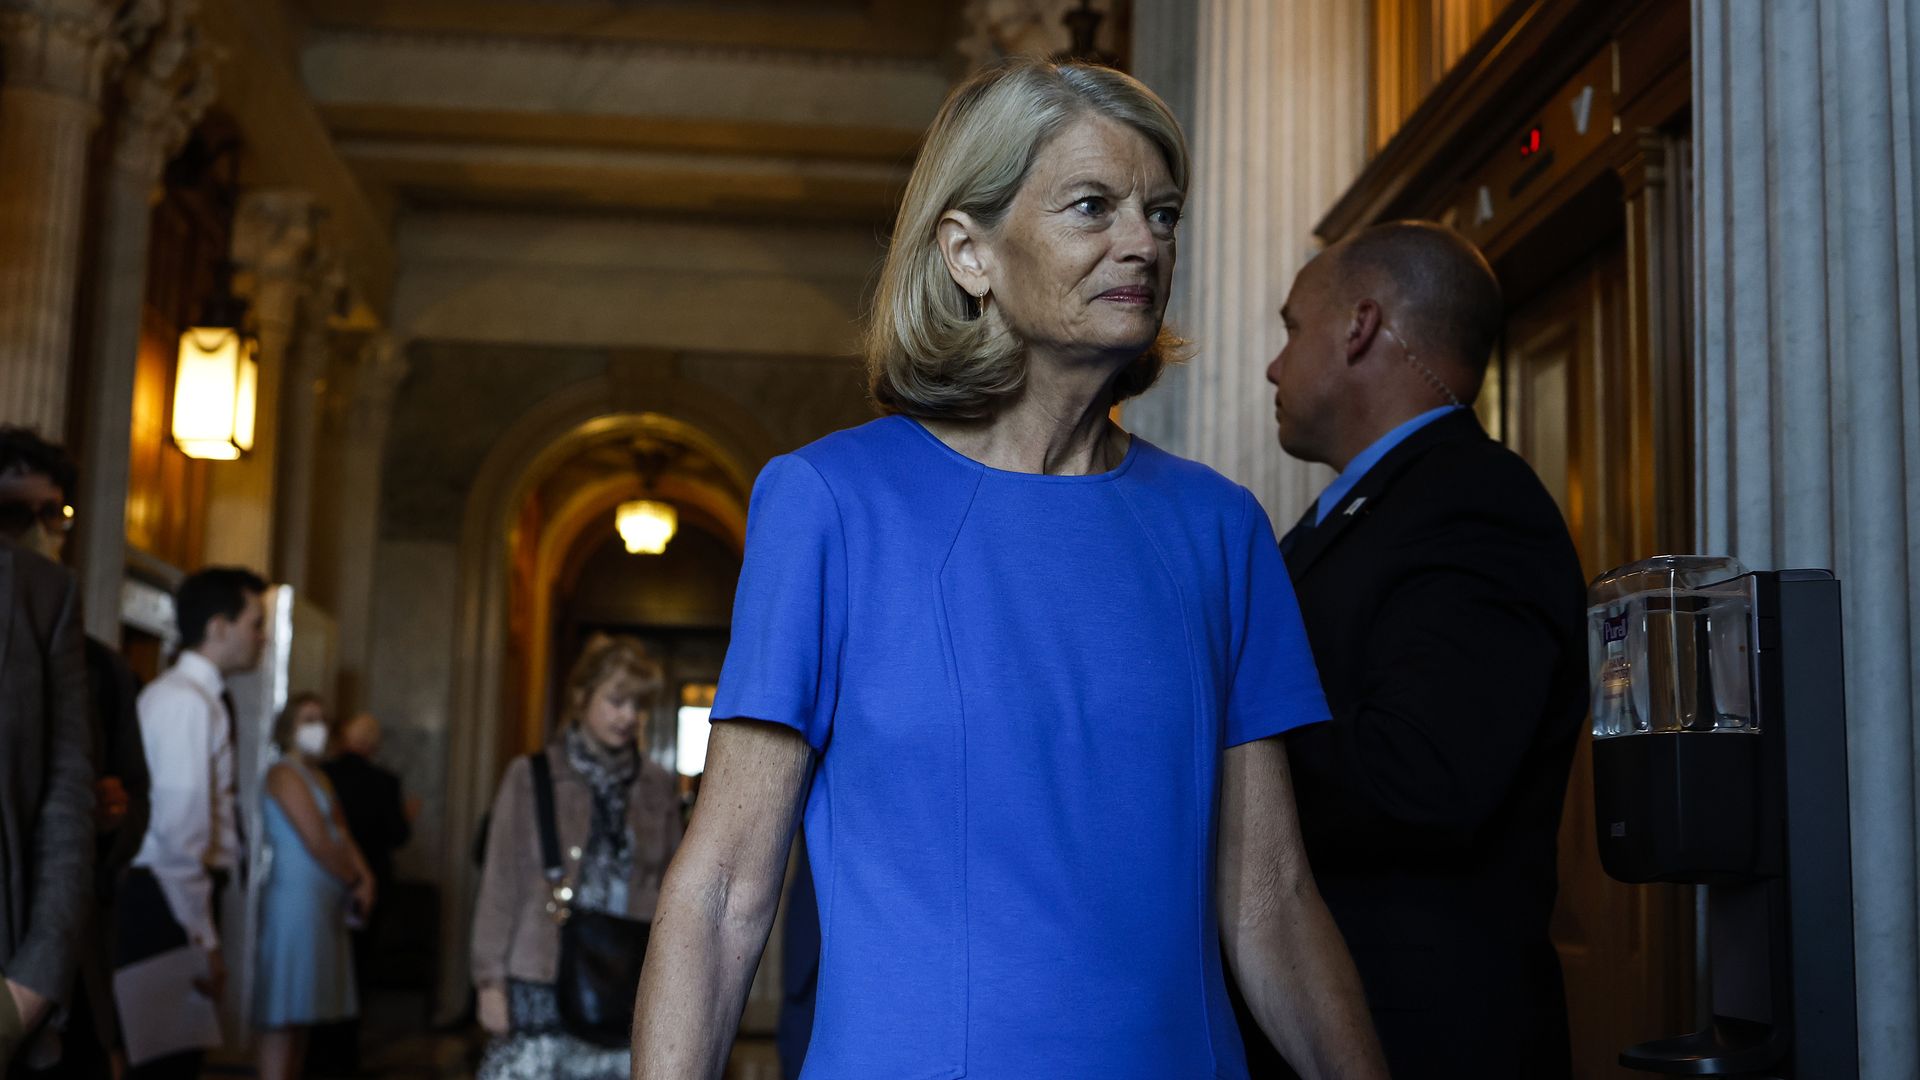 Sen. Lisa Murkowski, wearing a blue dress, walks past a Capitol Police officer into a Republican lunch at the U.S. Capitol.